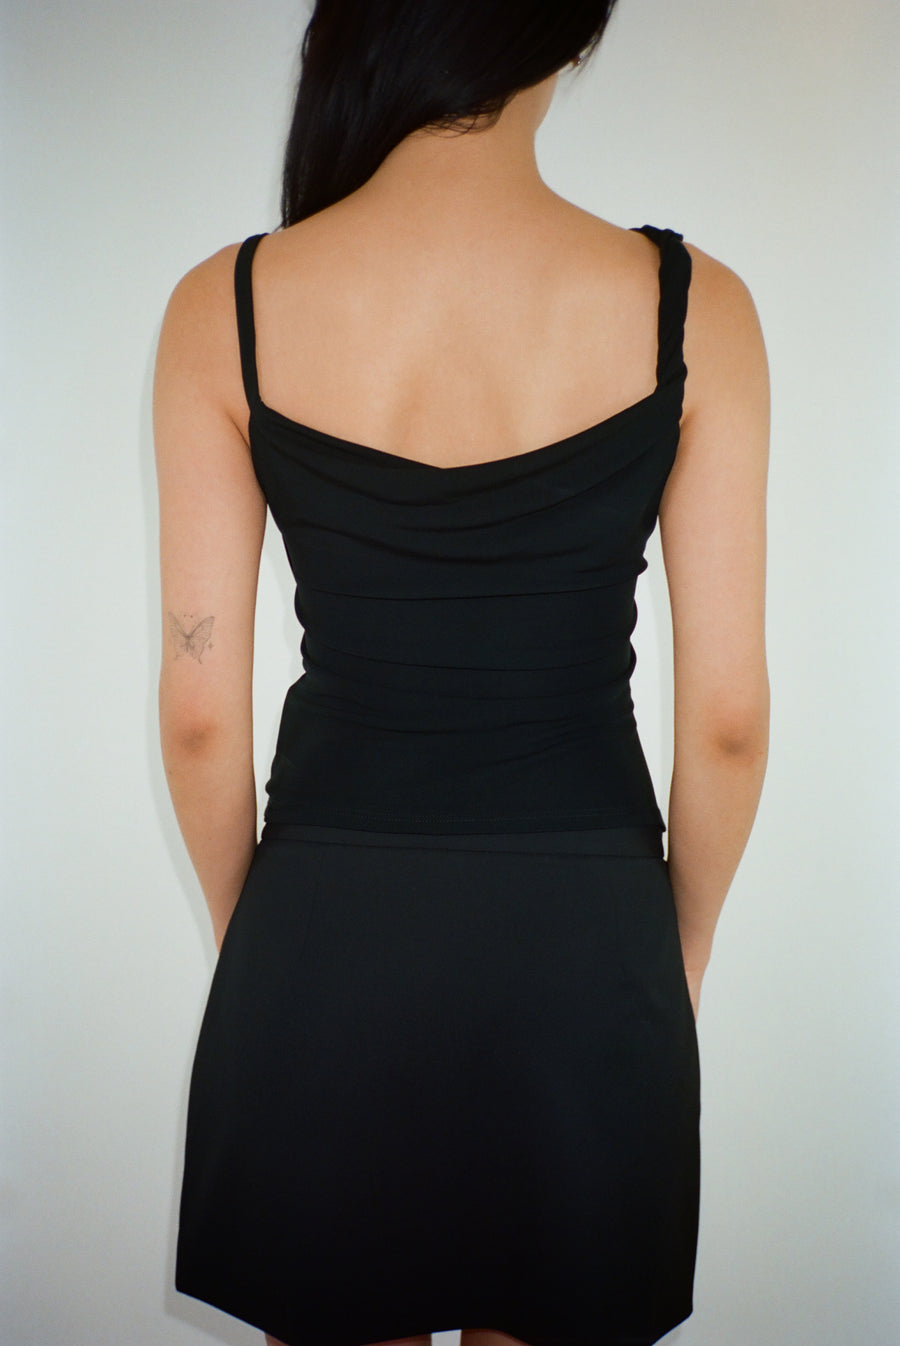 Draped asymmetric tank top in black with rosette details on model